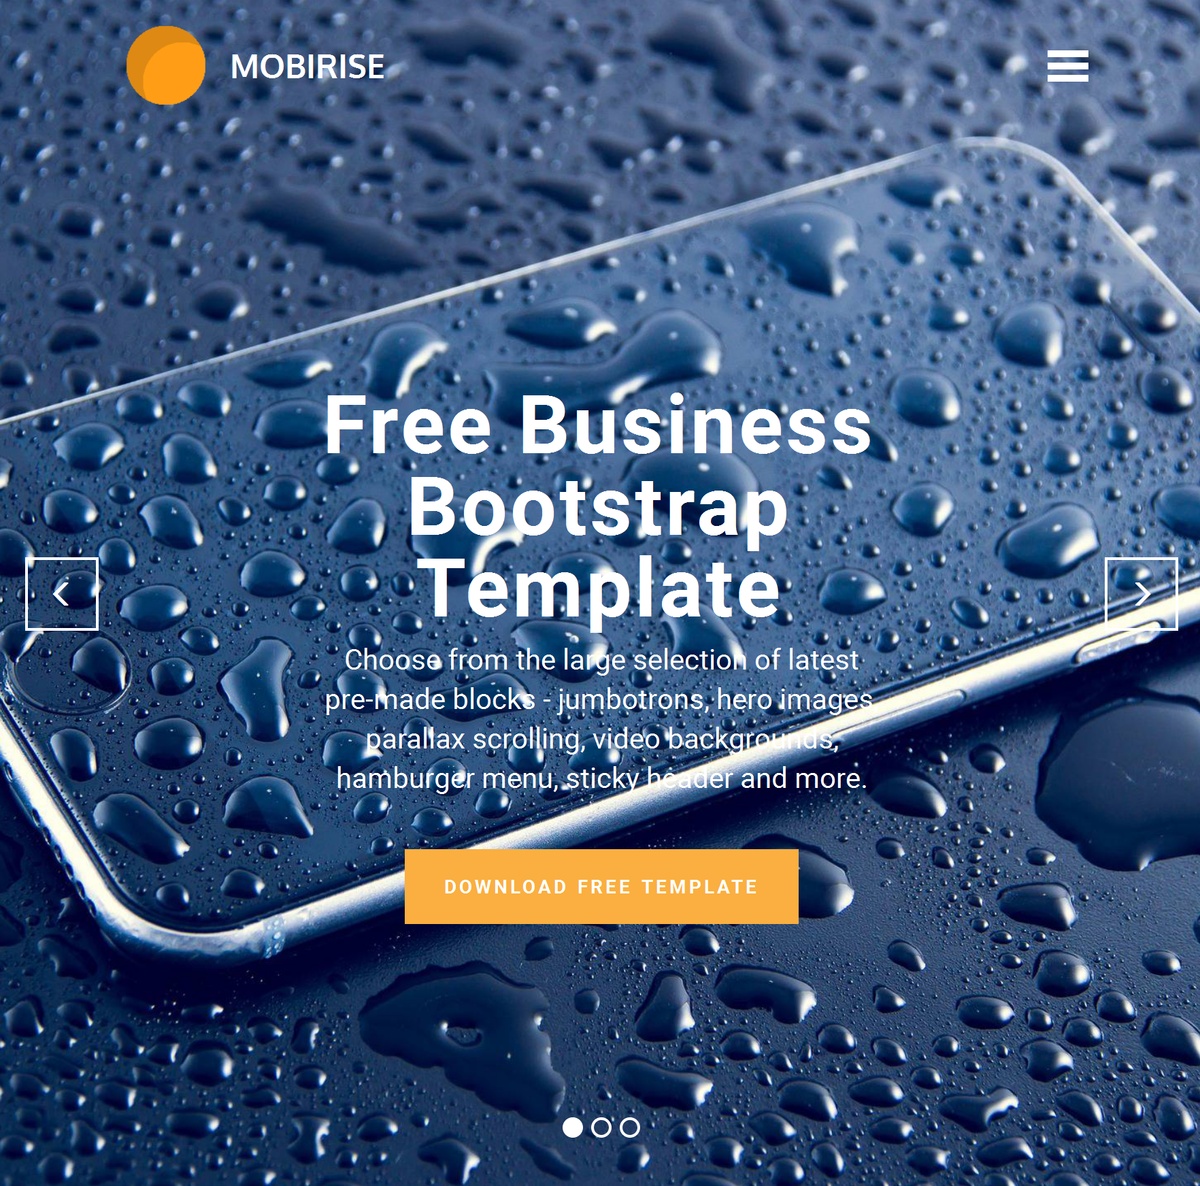 Mobile Responsive Site Templates Themes Extensions